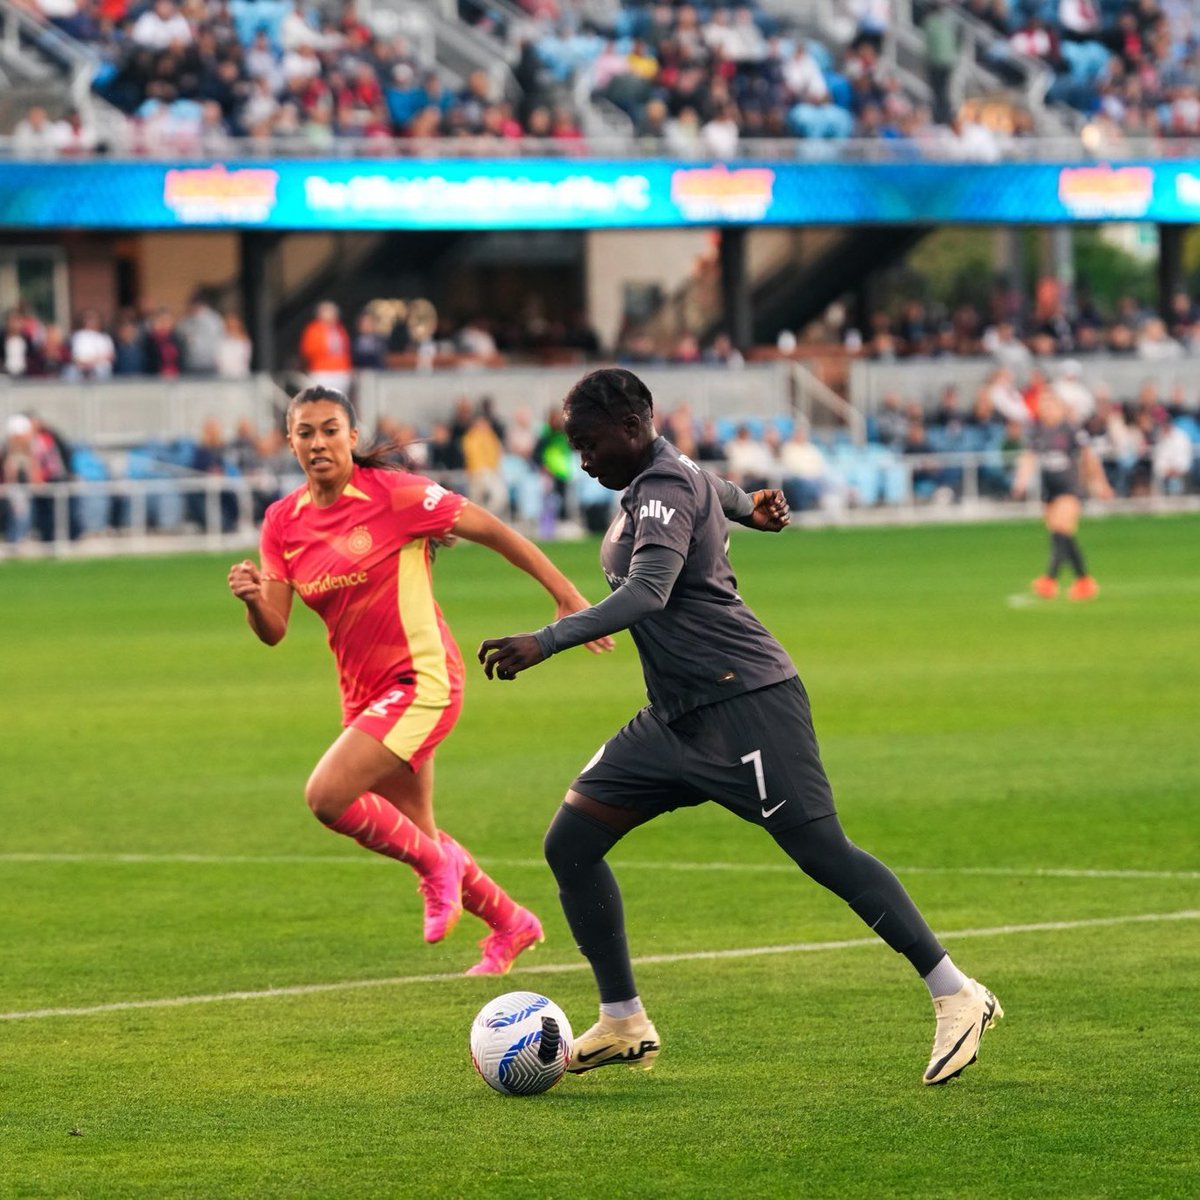 FT: Bay FC 2:3 Thorns
🇬🇭Princess Marfo Stats: 

📊Rating: 6.7/10
⏱️Mins Played: 83
🤗Touches: 29
✅Acc. Passes : 11/13
💪🏾Tackles won : 3/3 
🎯Shots(OT) : 1(0)
🤺: Gr. Duels Won: 4/9
✈️Aerial Duels won: 1/2
🚧 Recoveries: 4
 [Sofascore]
#GhanaiansAbroad #NWSL #BayFC